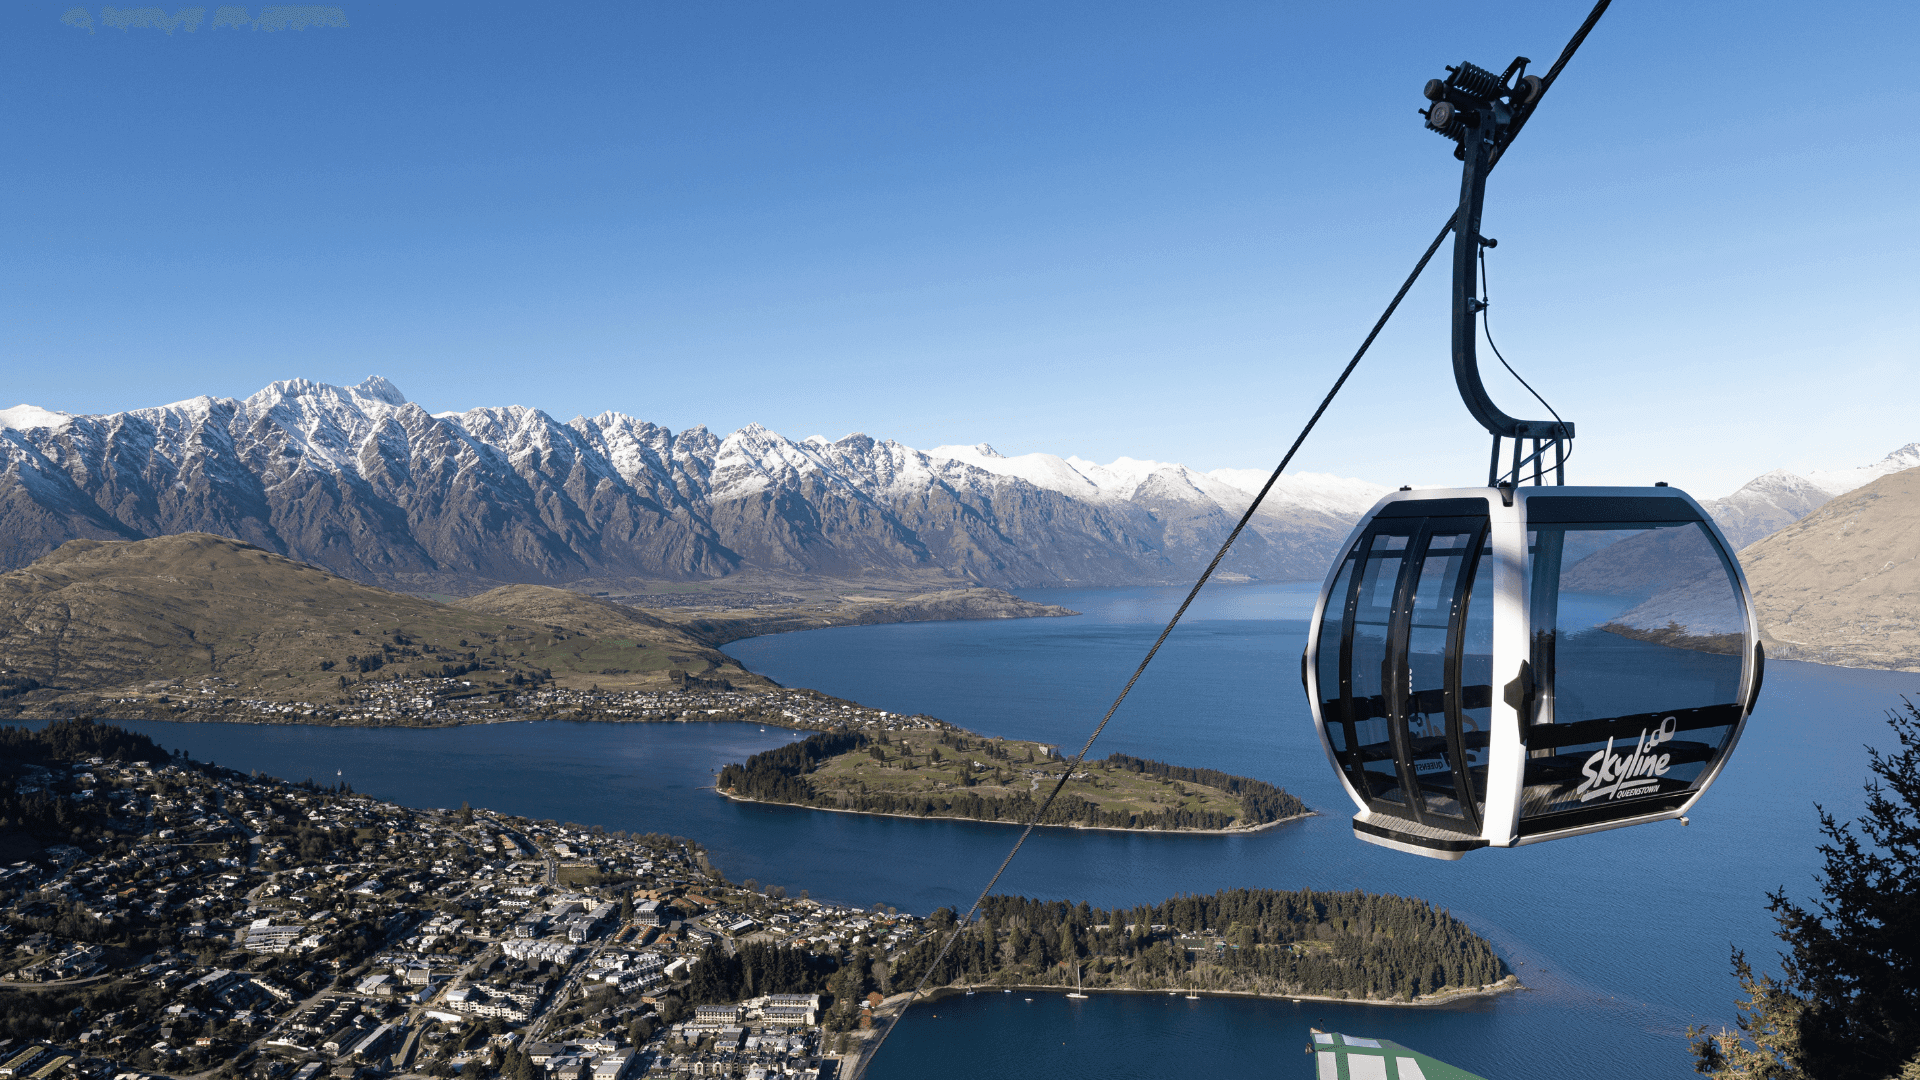 Beautiful landscape image of the Gondola with mountains in the background